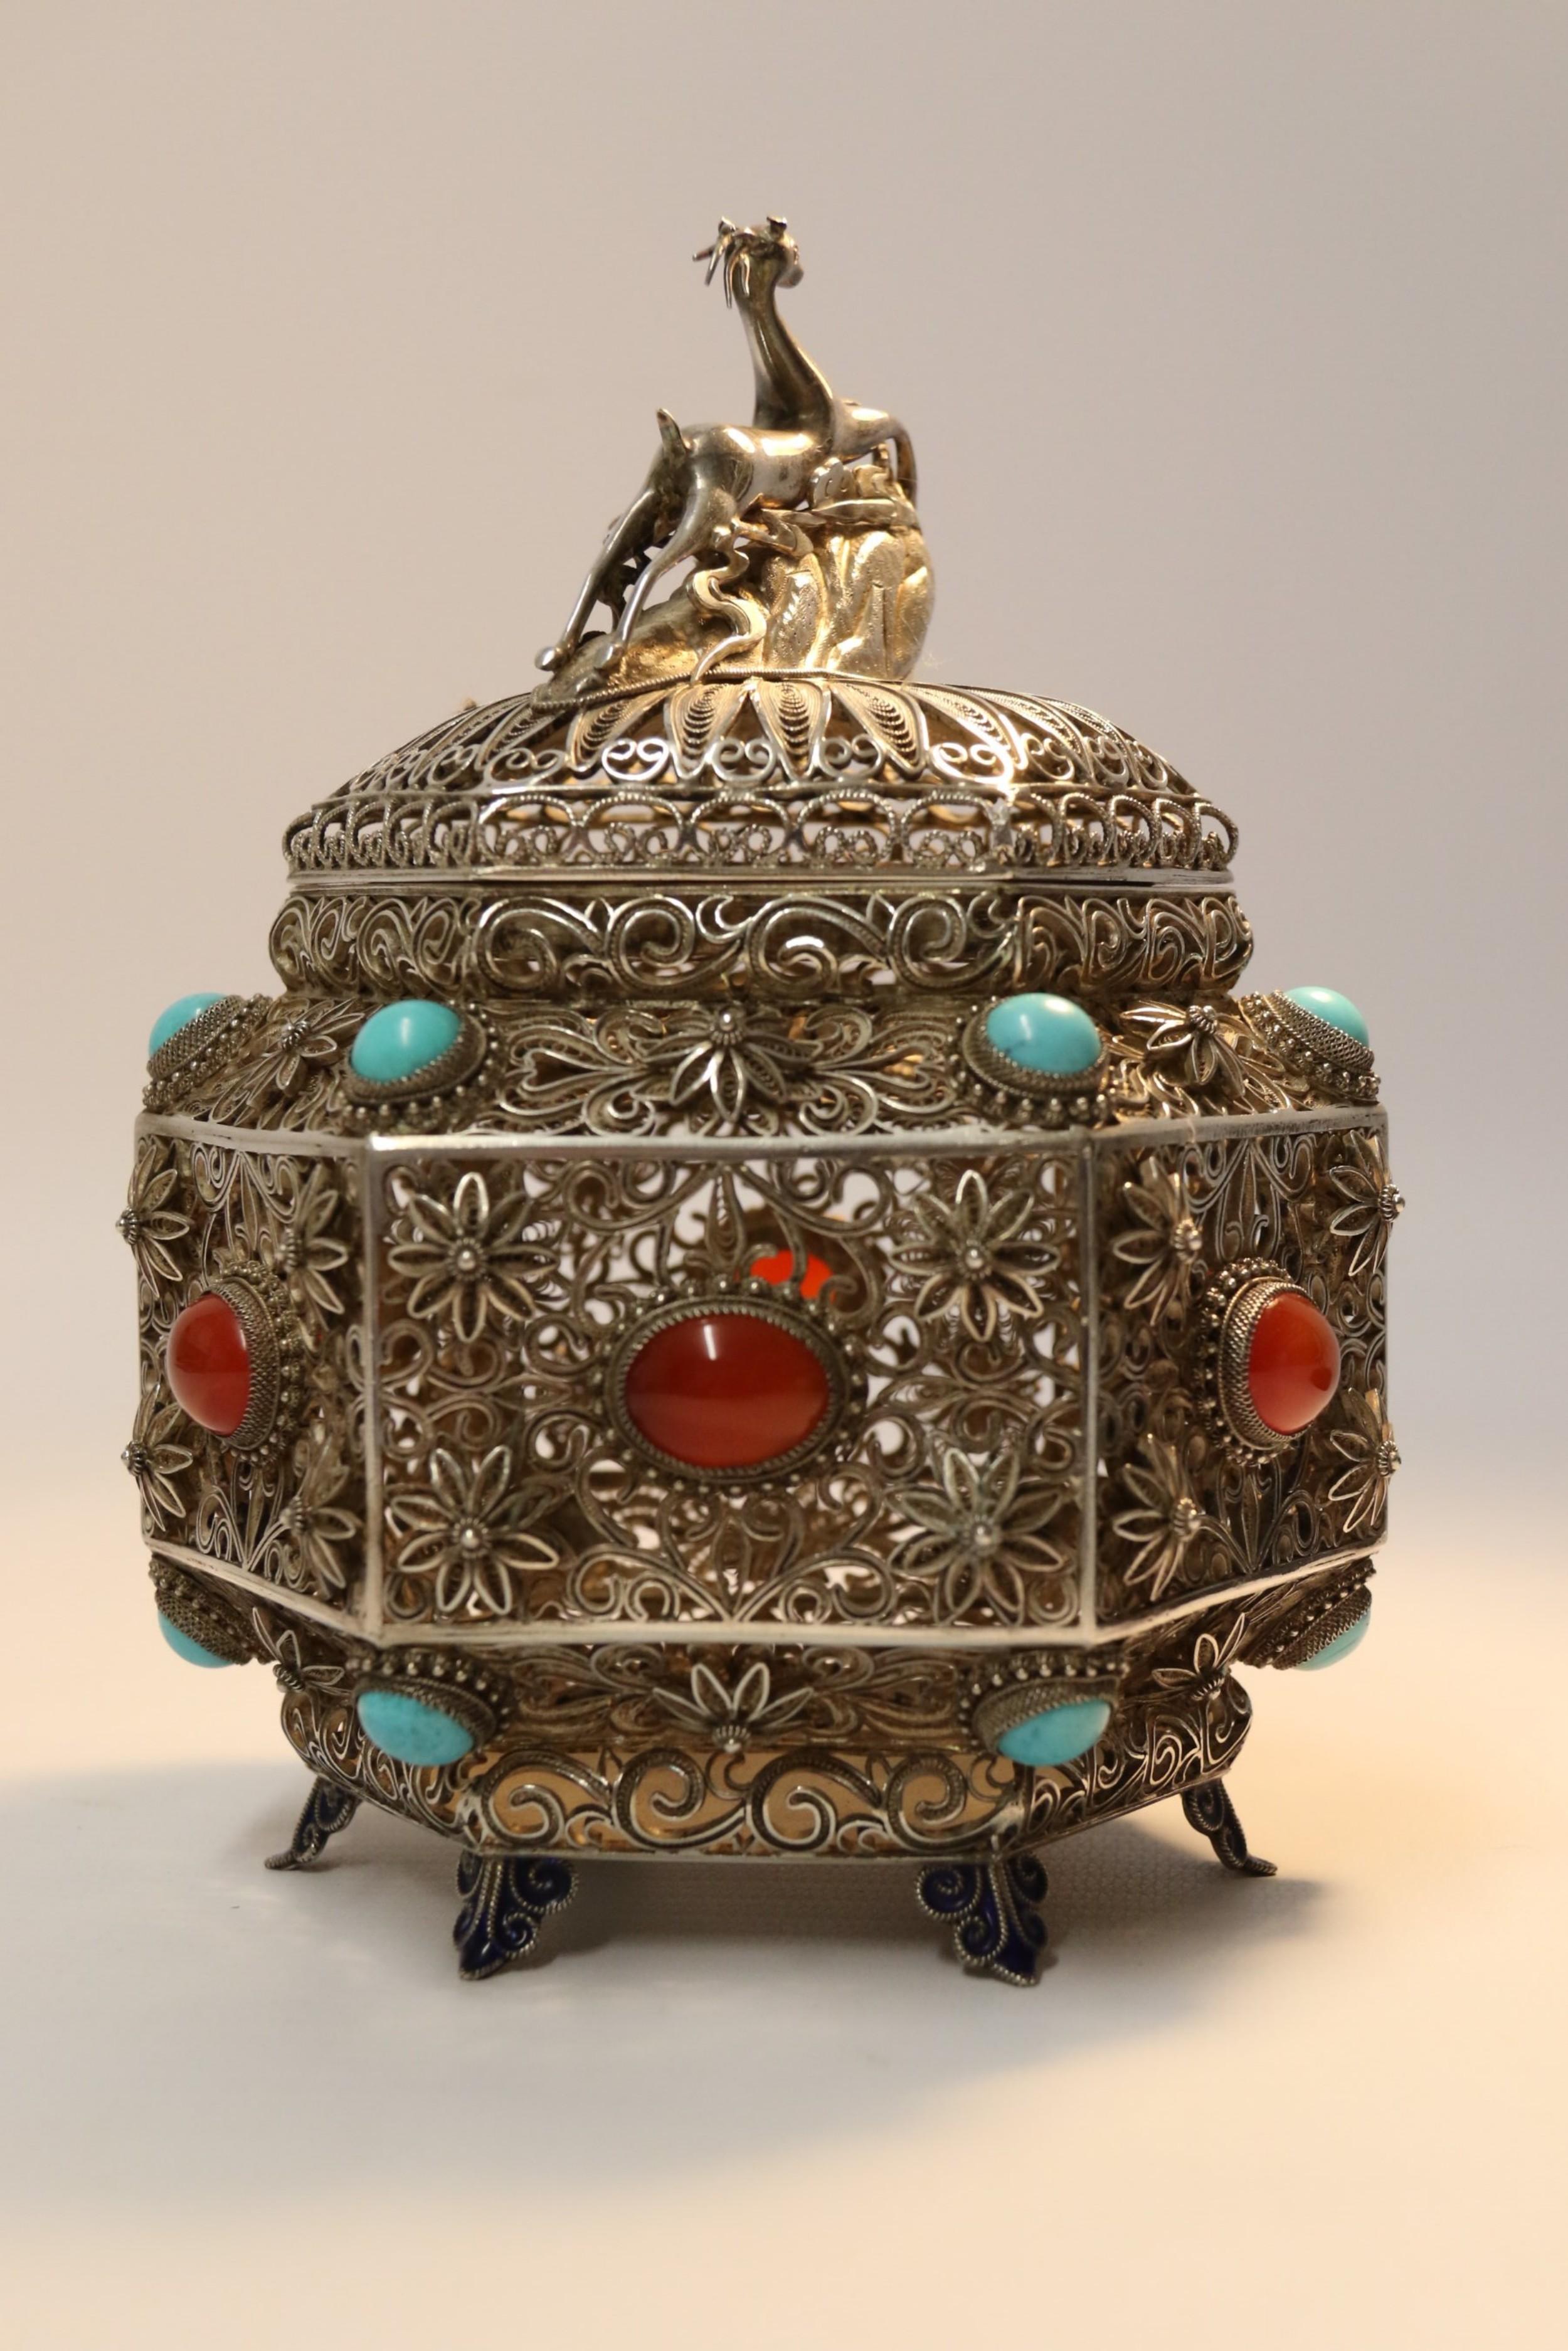 19th Century Indian Silver Filigree Work Incense Burner with Mounted Cabochons For Sale 3